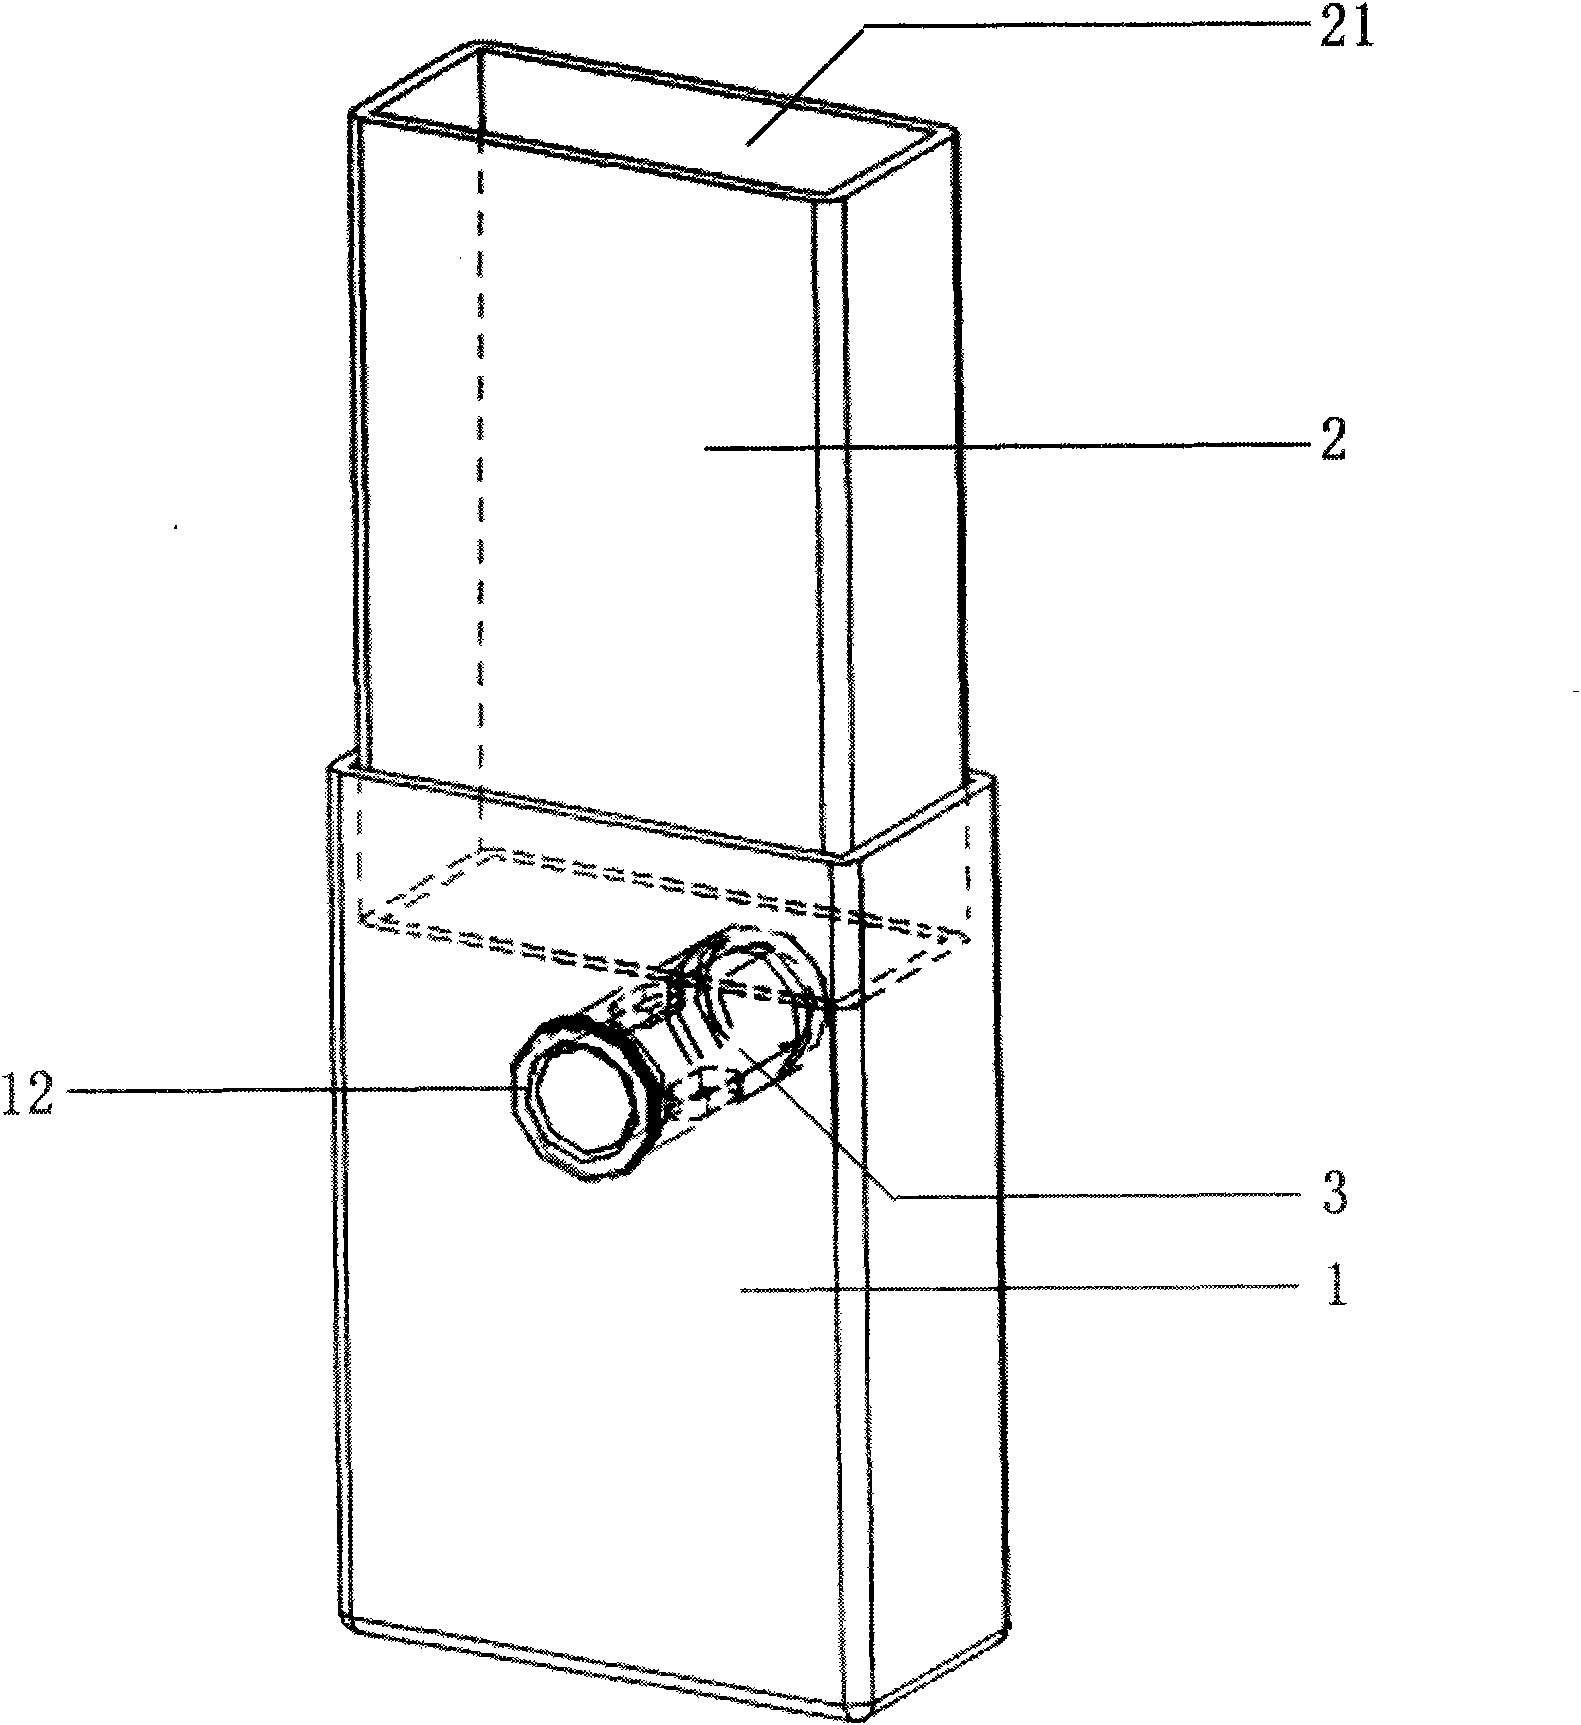 Positioning and cooling device for perforating vertical plane